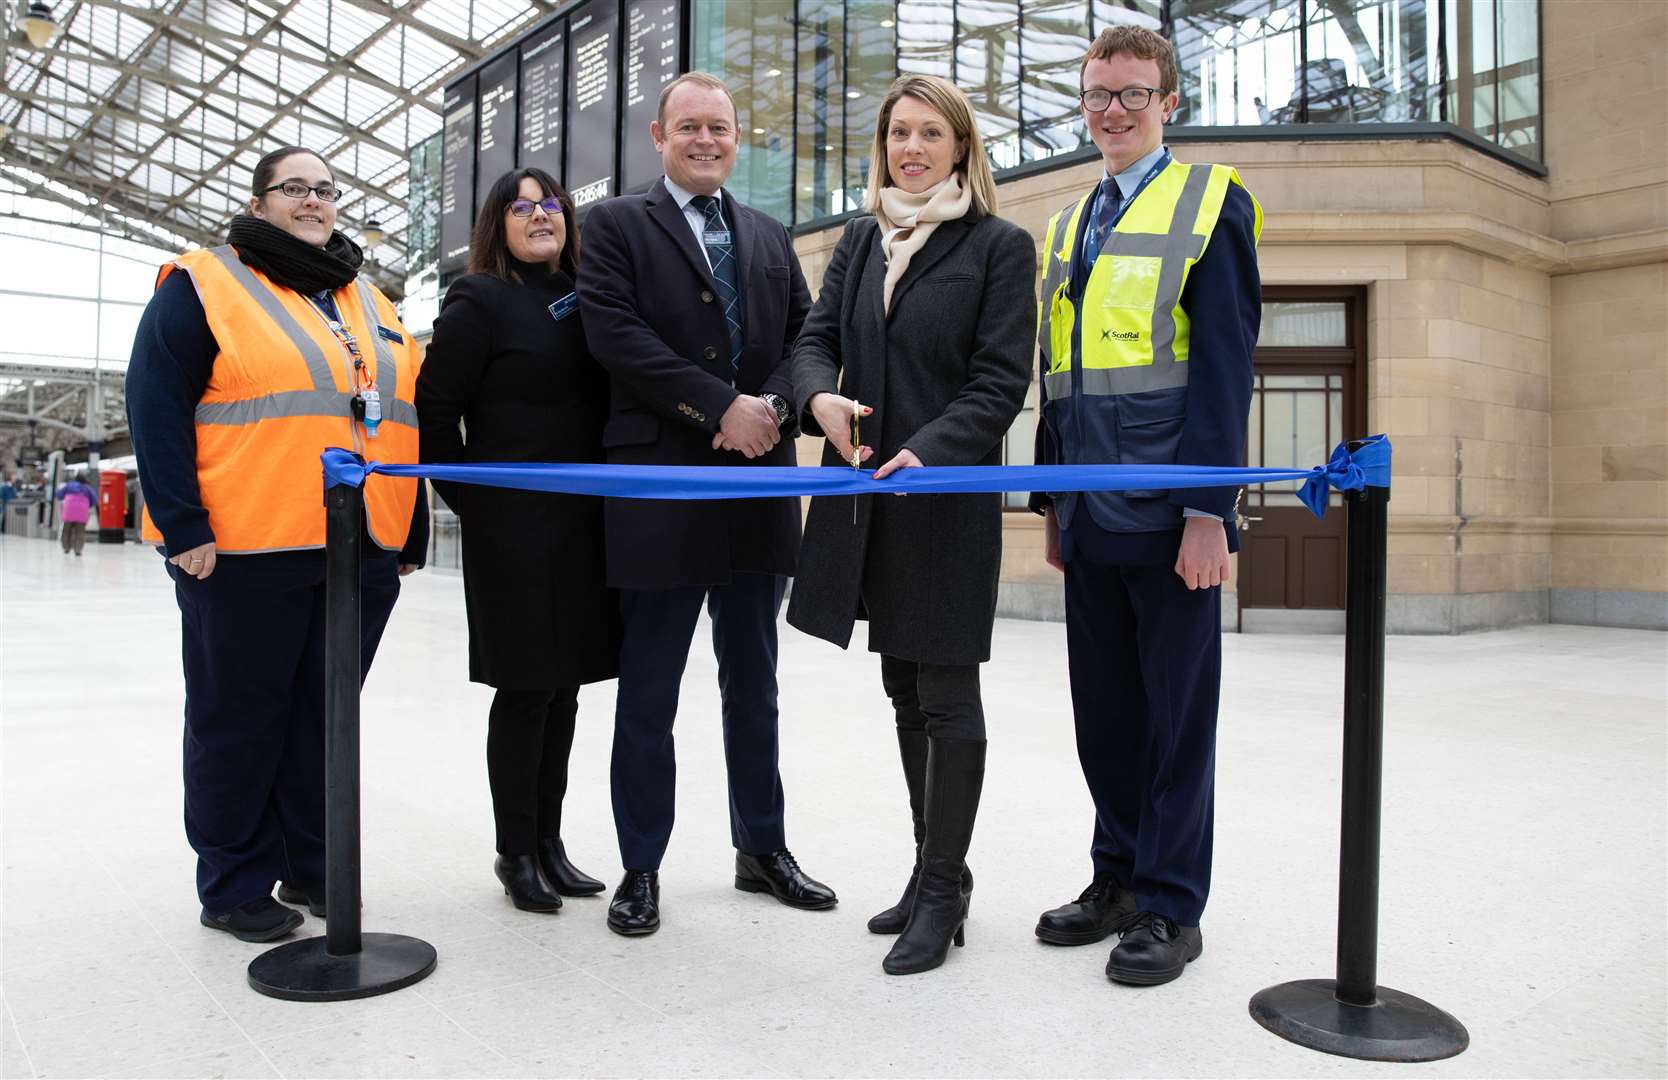 Aberdeen station staff members Nicola and Ross with Kirsty Devlin, ScotRail Head of Projects, Alex Hynes, managing director of Scotland’s Railway and Transport Minister Jenny Gilruth MSP.